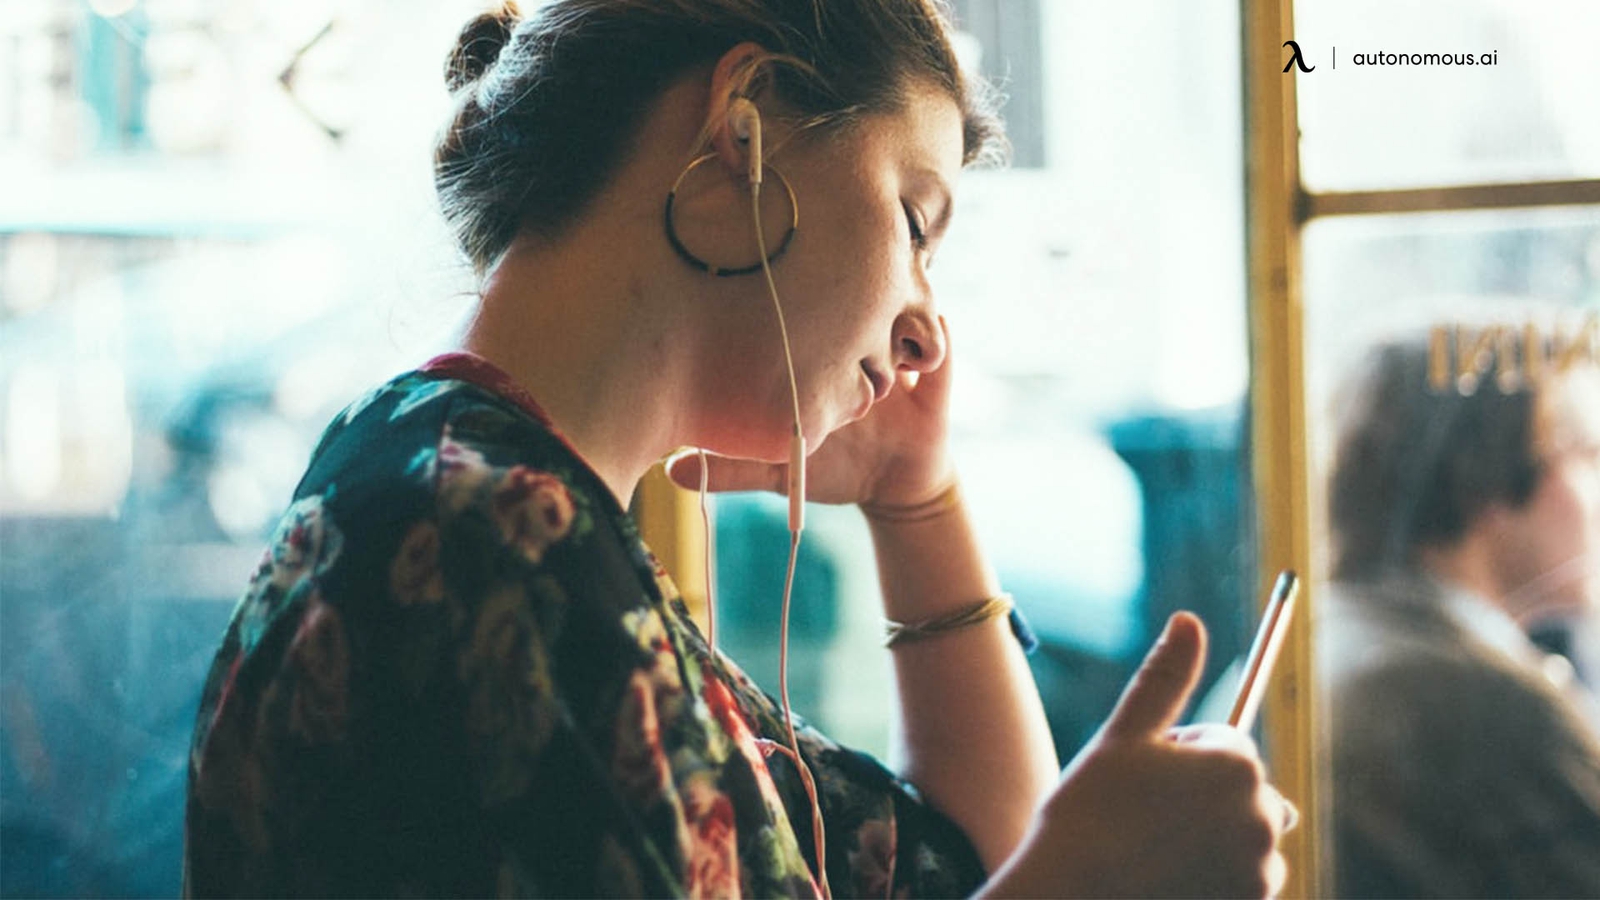 Listening to Music at Work: Is it Good or Bad?